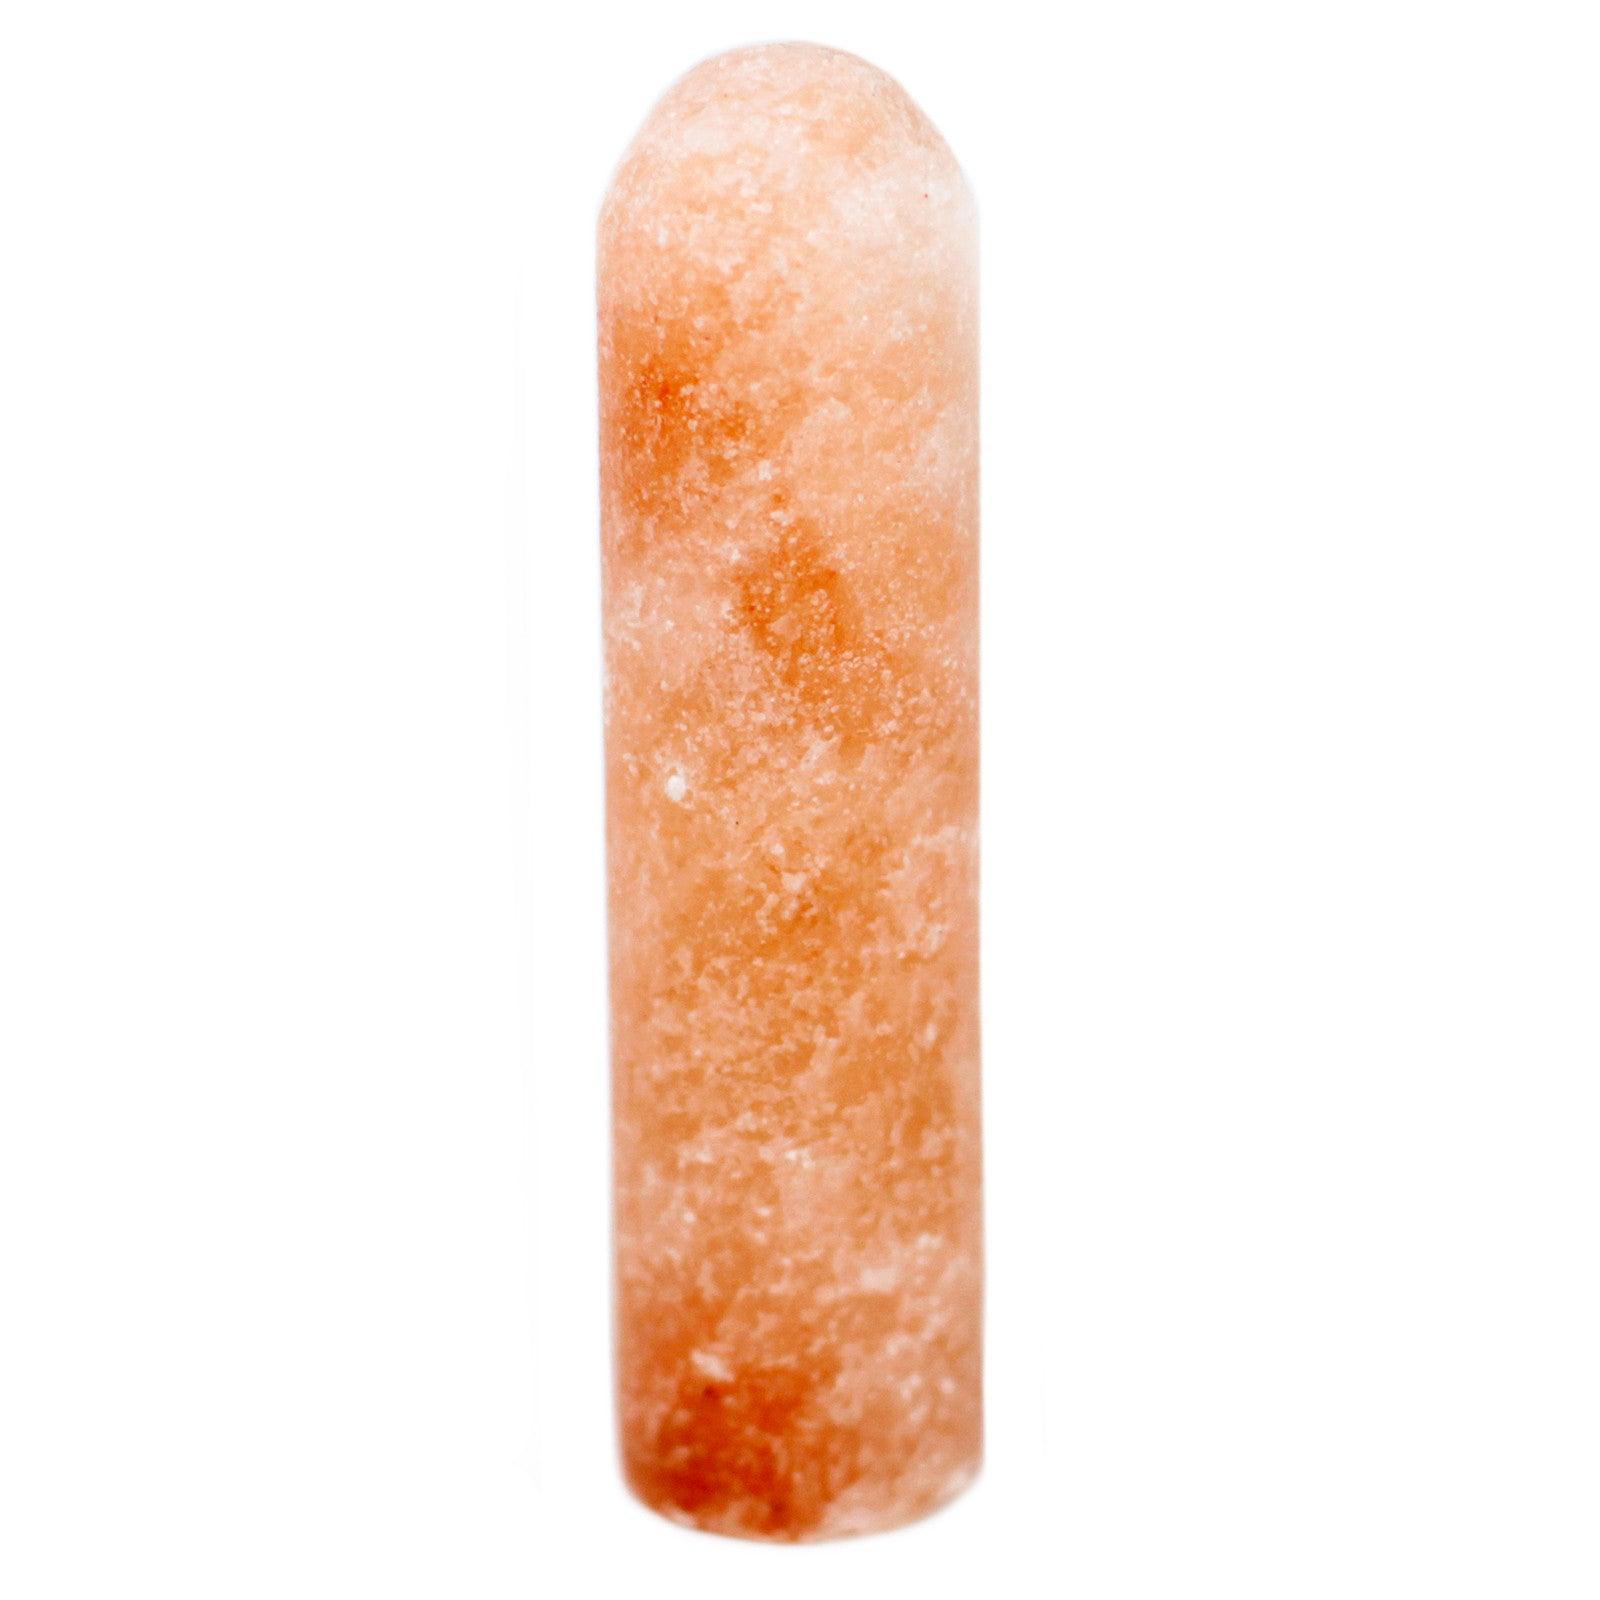 Natural Himalayan Salt Deodorant Stone - Stick x 3 - Home Inspired Gifts